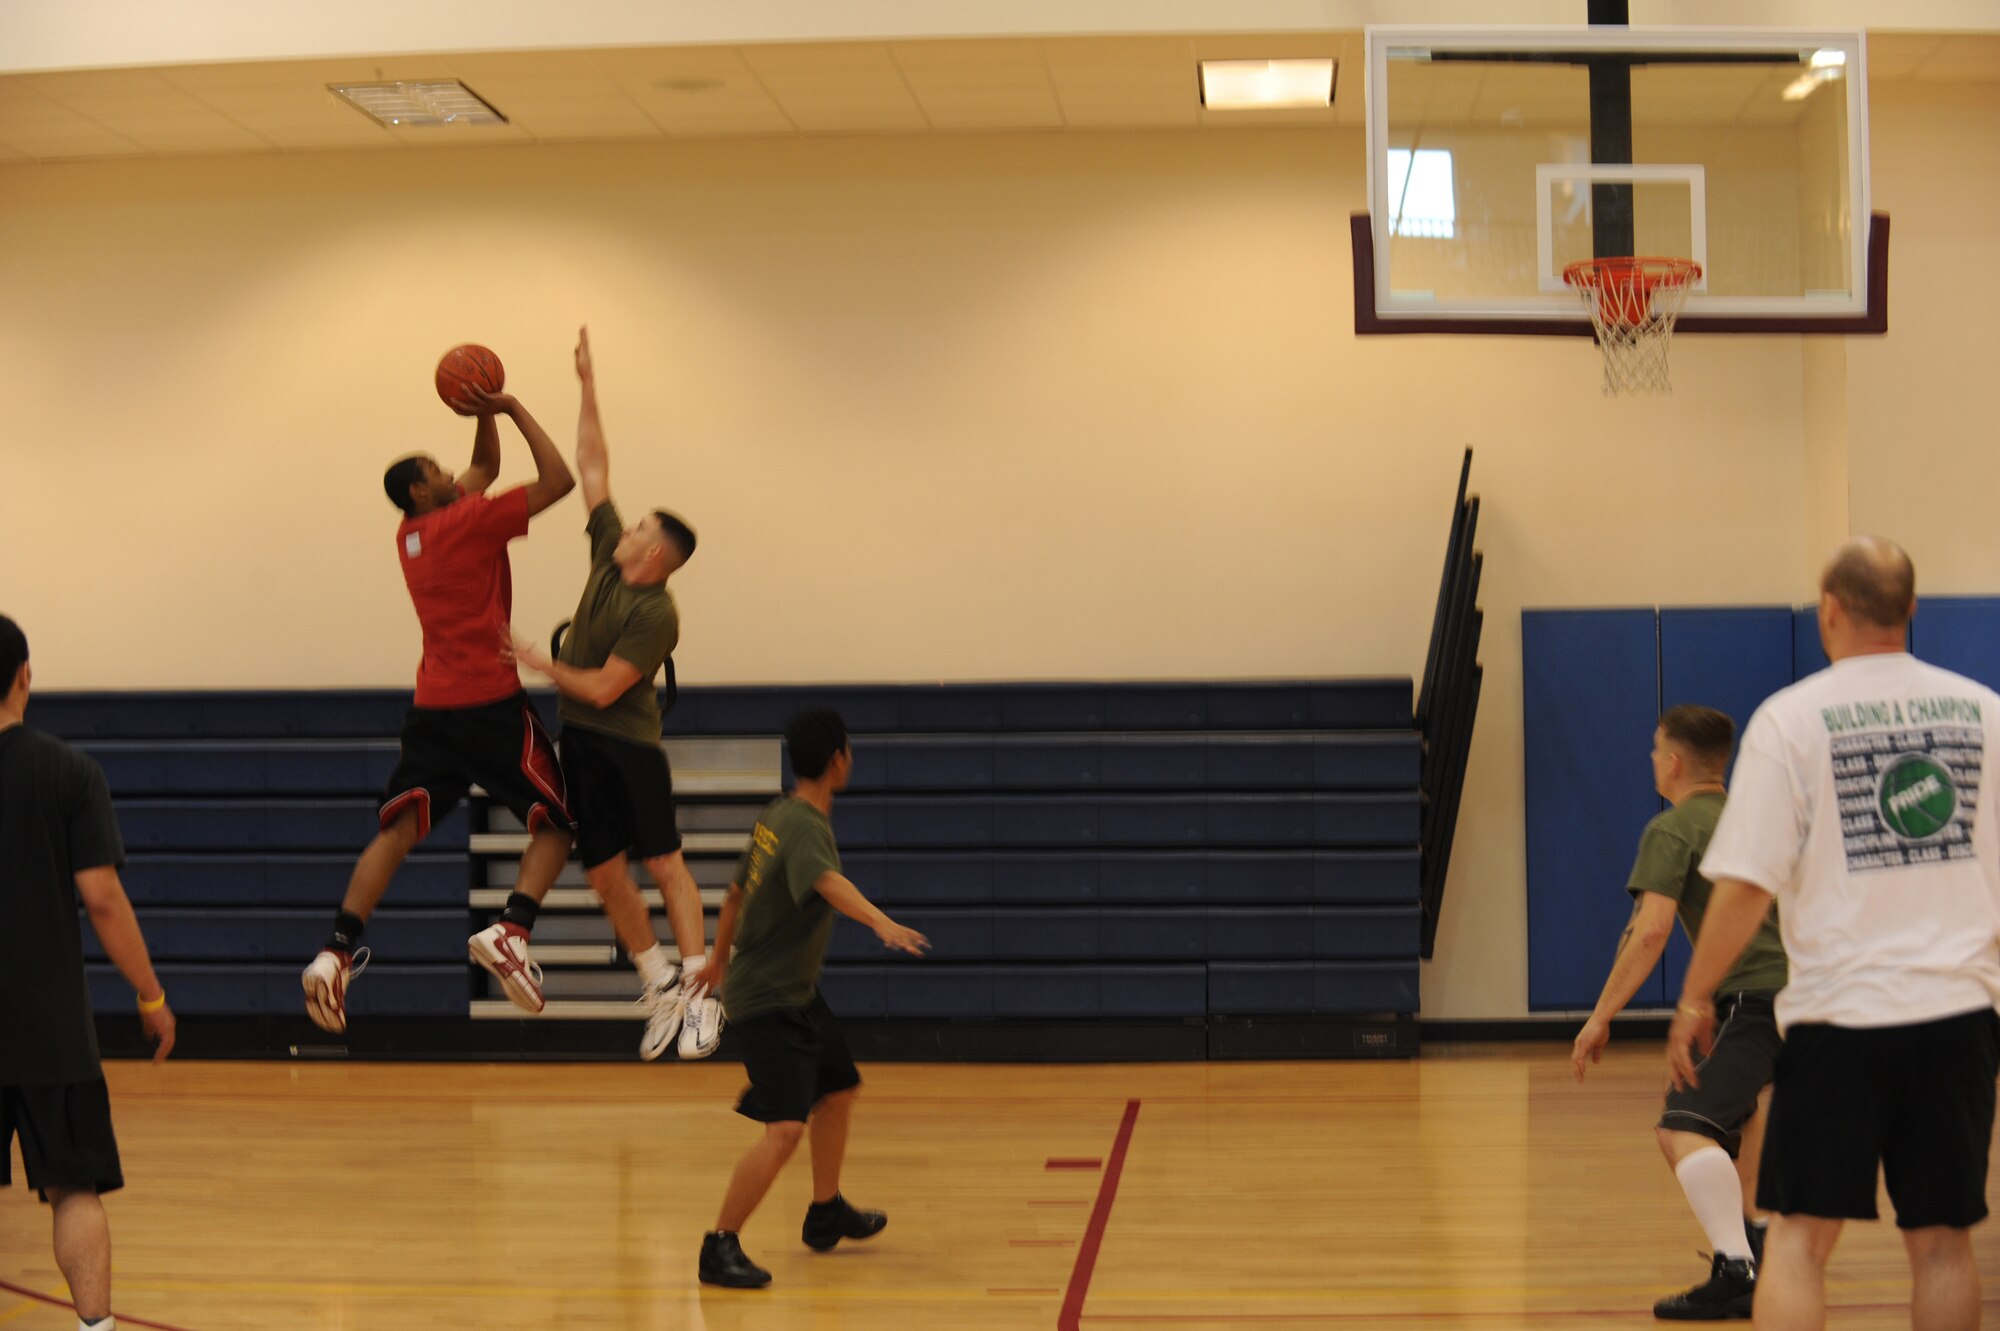 BUCKLEY AIR FORCE BASE, Colo.--Staff Sgt. Alfred Davis, 4th Manpower Requirements Squadron, takes a shot during the 3 on 3 Hoops Classic at the Buckley Fitness Center Jan. 27. (U.S. Air Force by Airman 1st Class Marcy Glass)